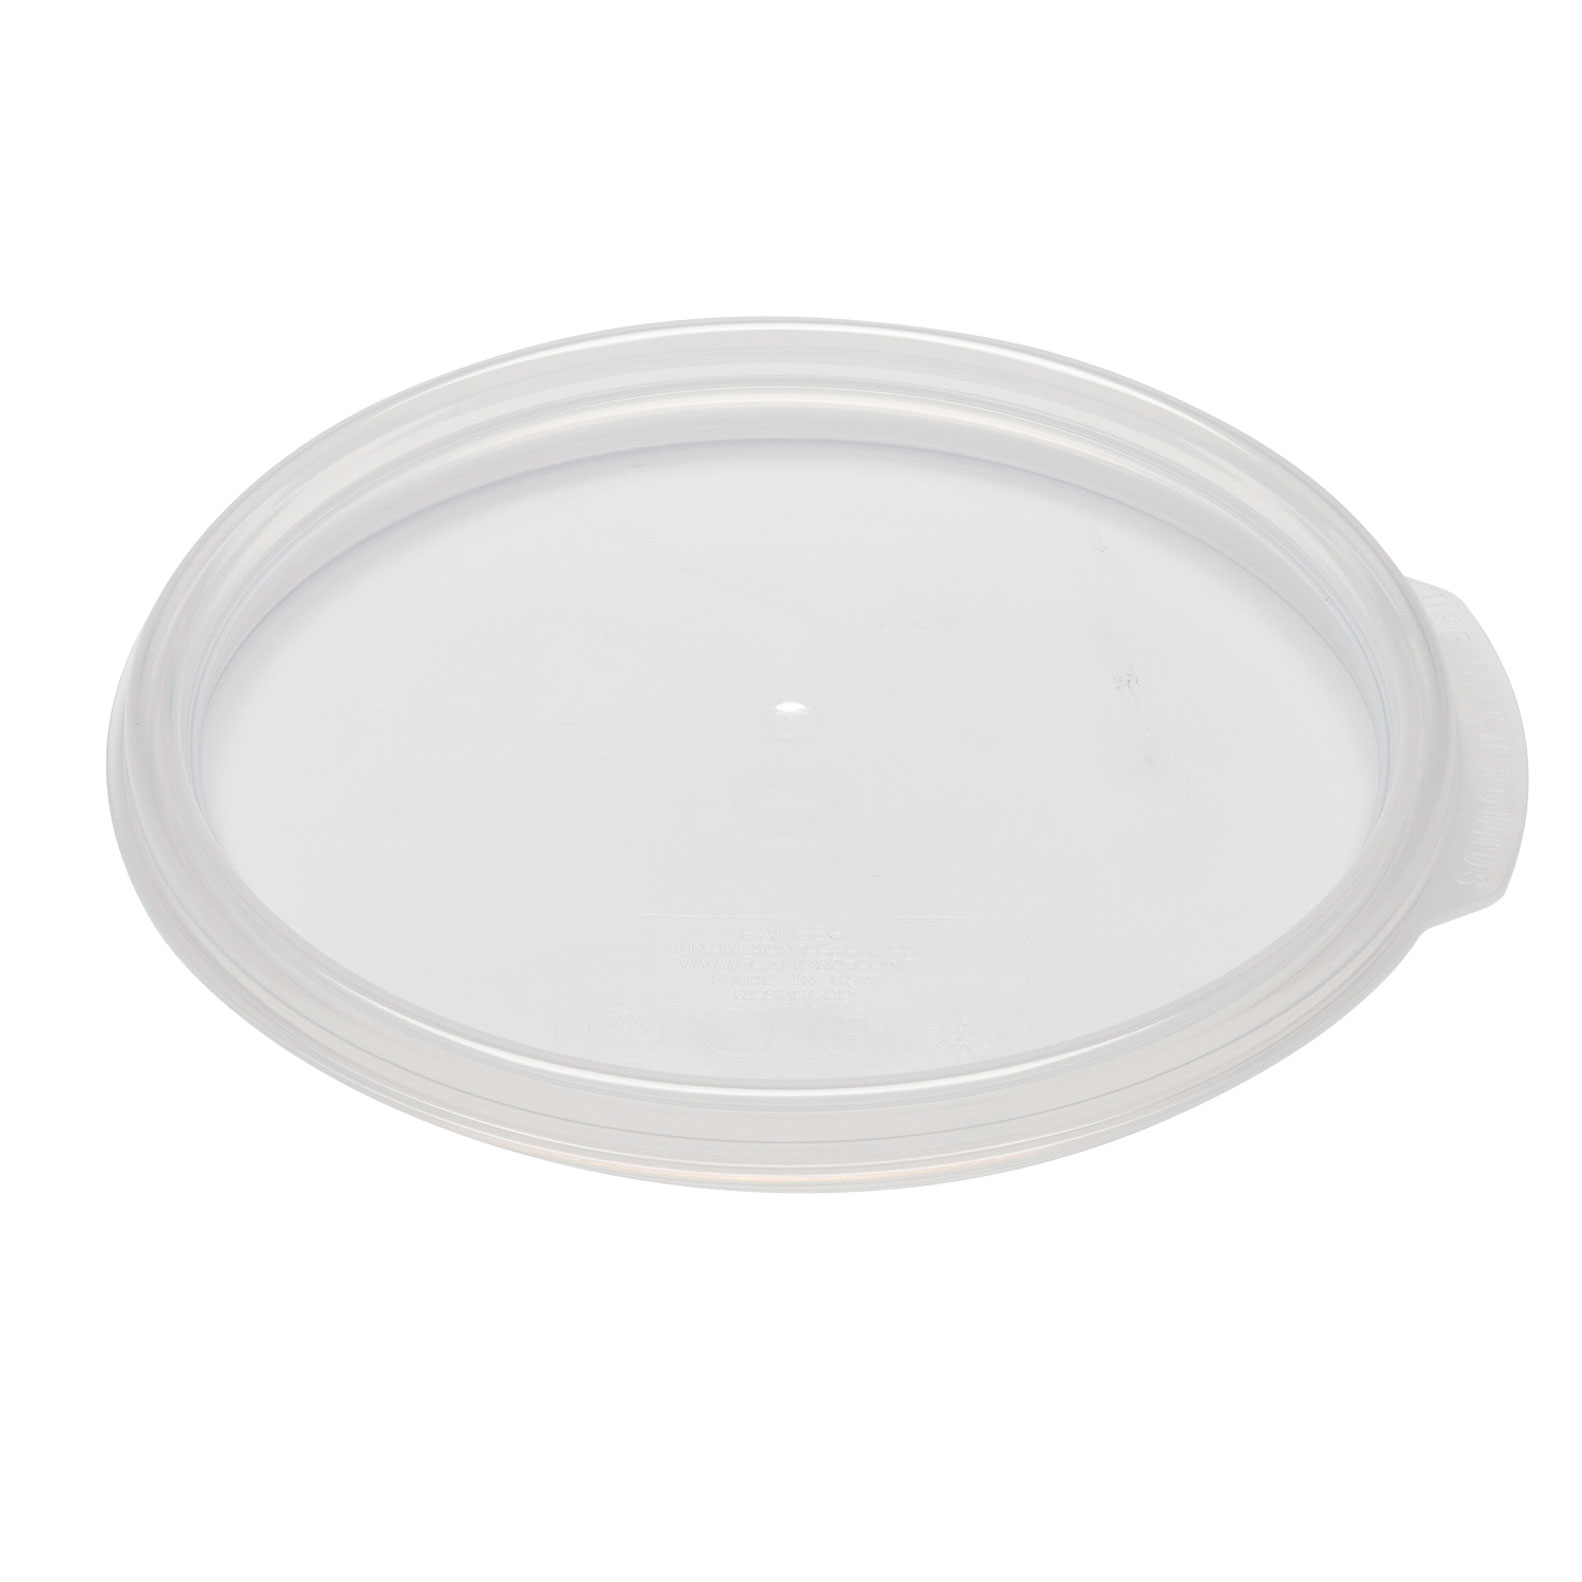 SEAL COVER FOR CW CLEAR 1qt.
ROUND FOOD CONTAINERS, 
TRANSLUCENT, EACH